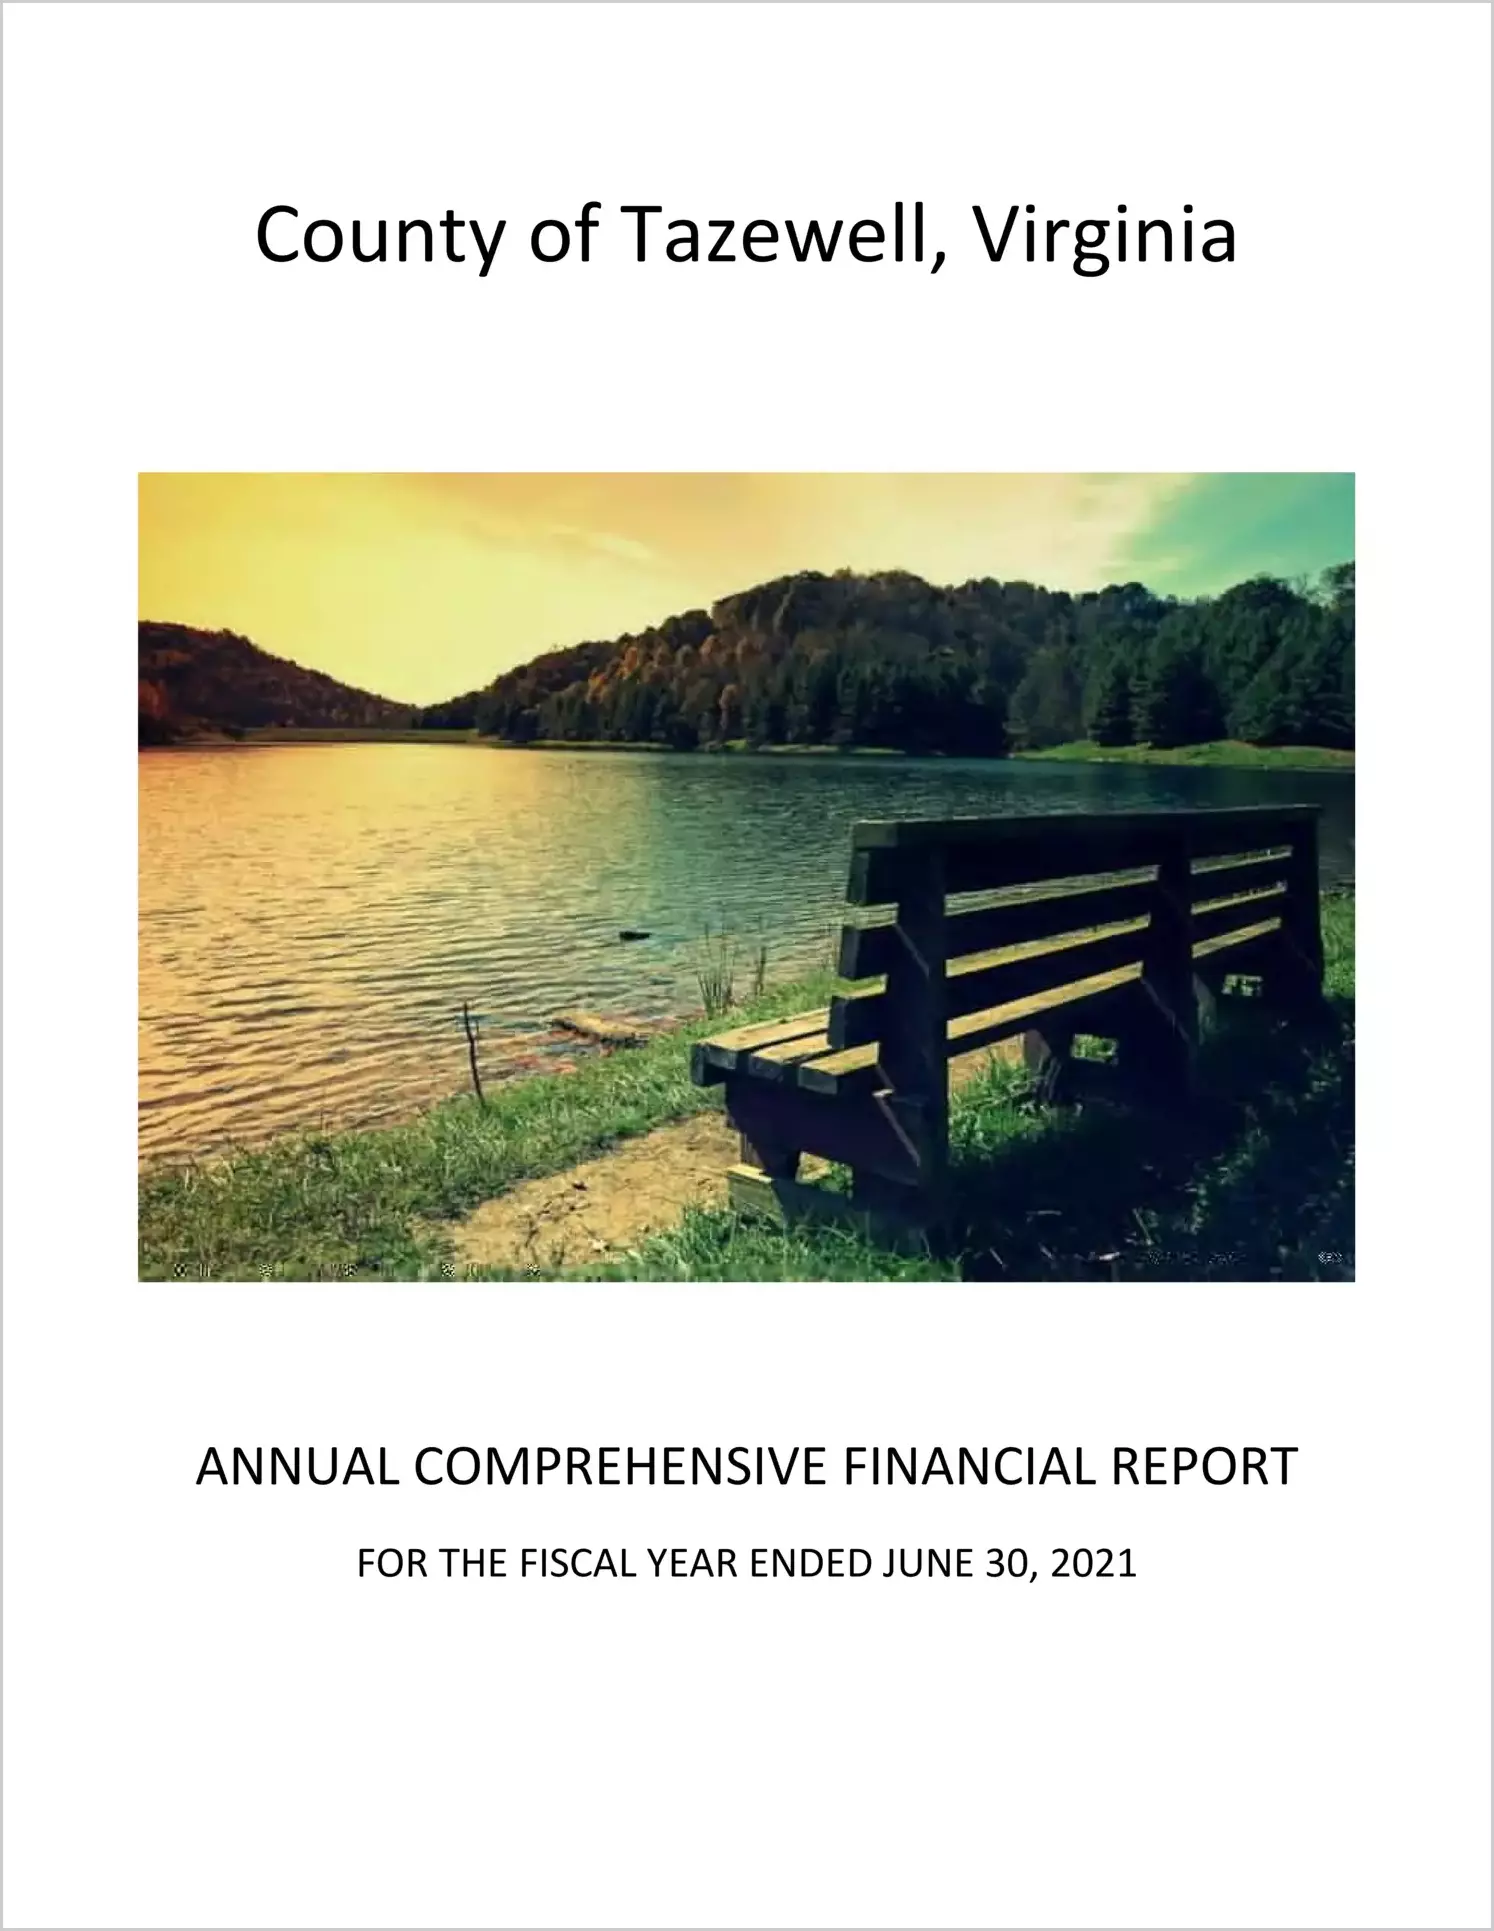 2021 Annual Financial Report for County of Tazewell